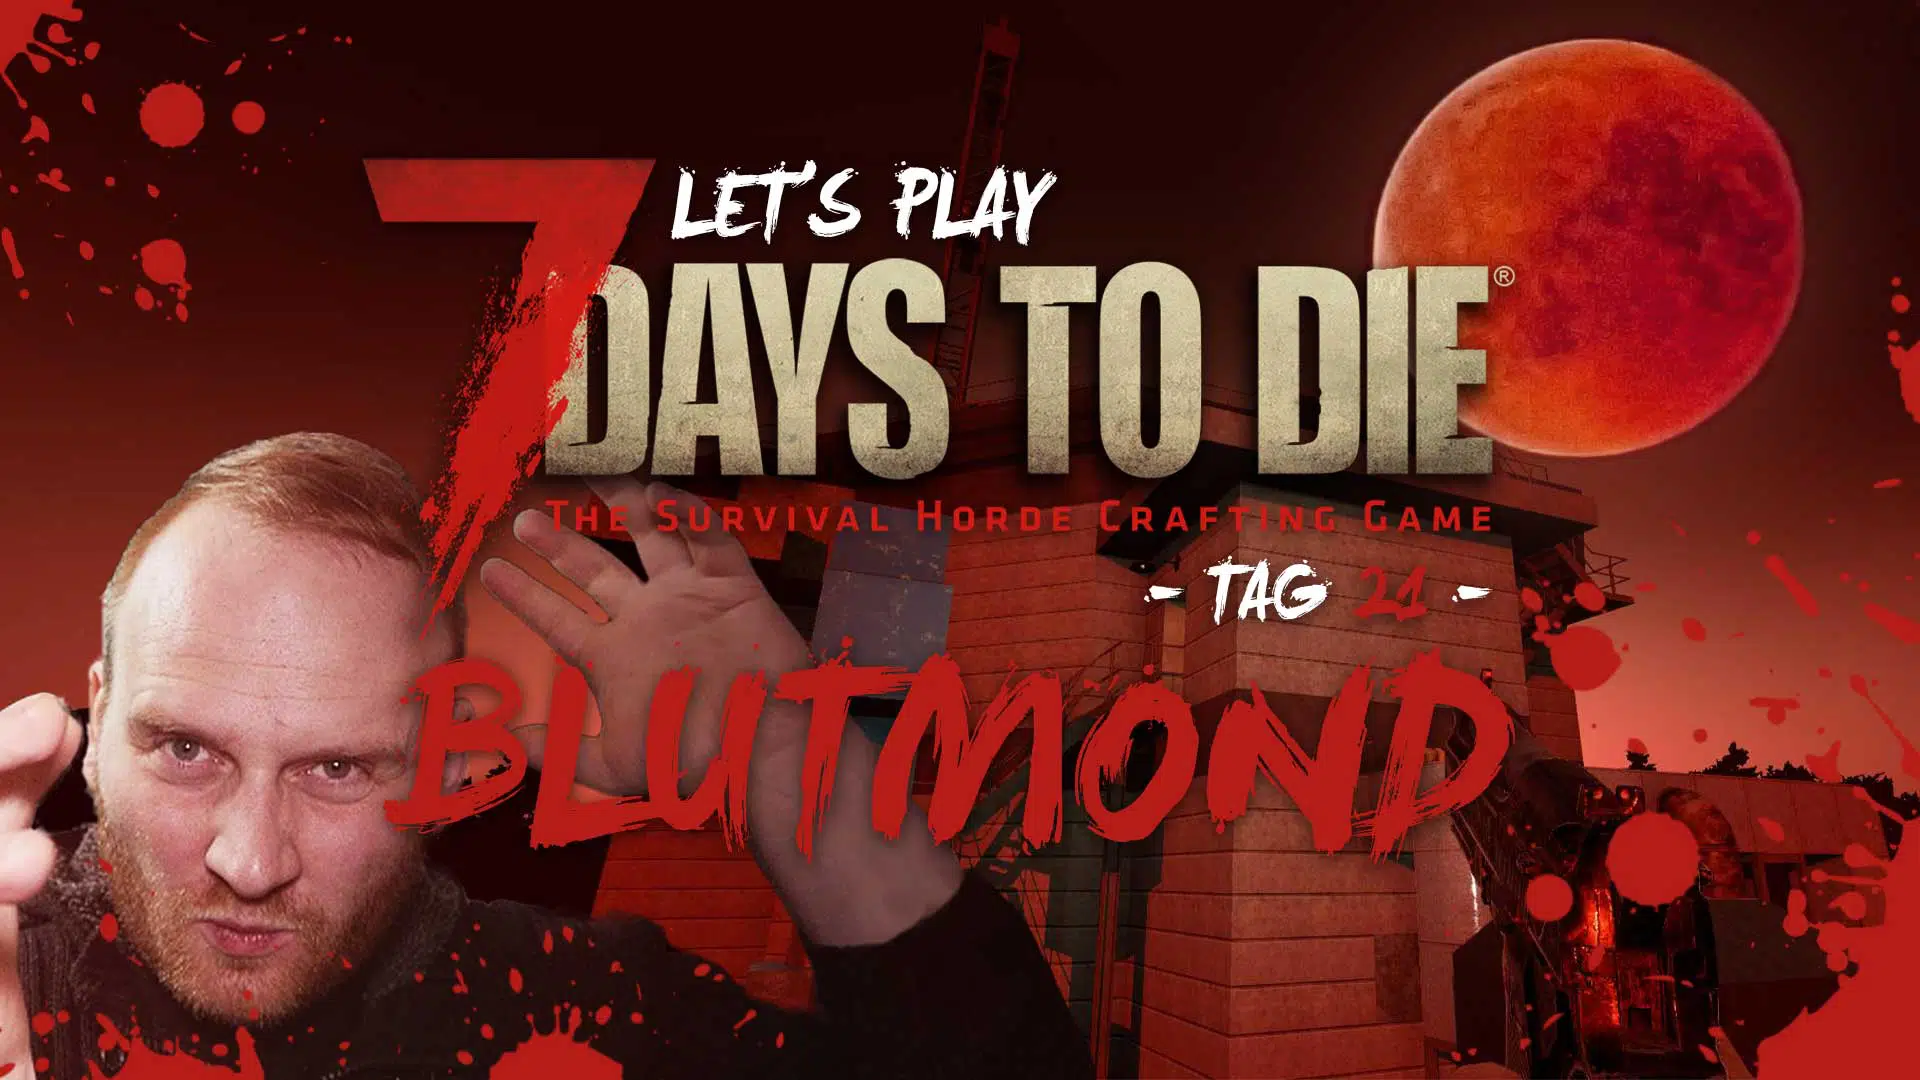 lets play 7 days to die tag 21 GG